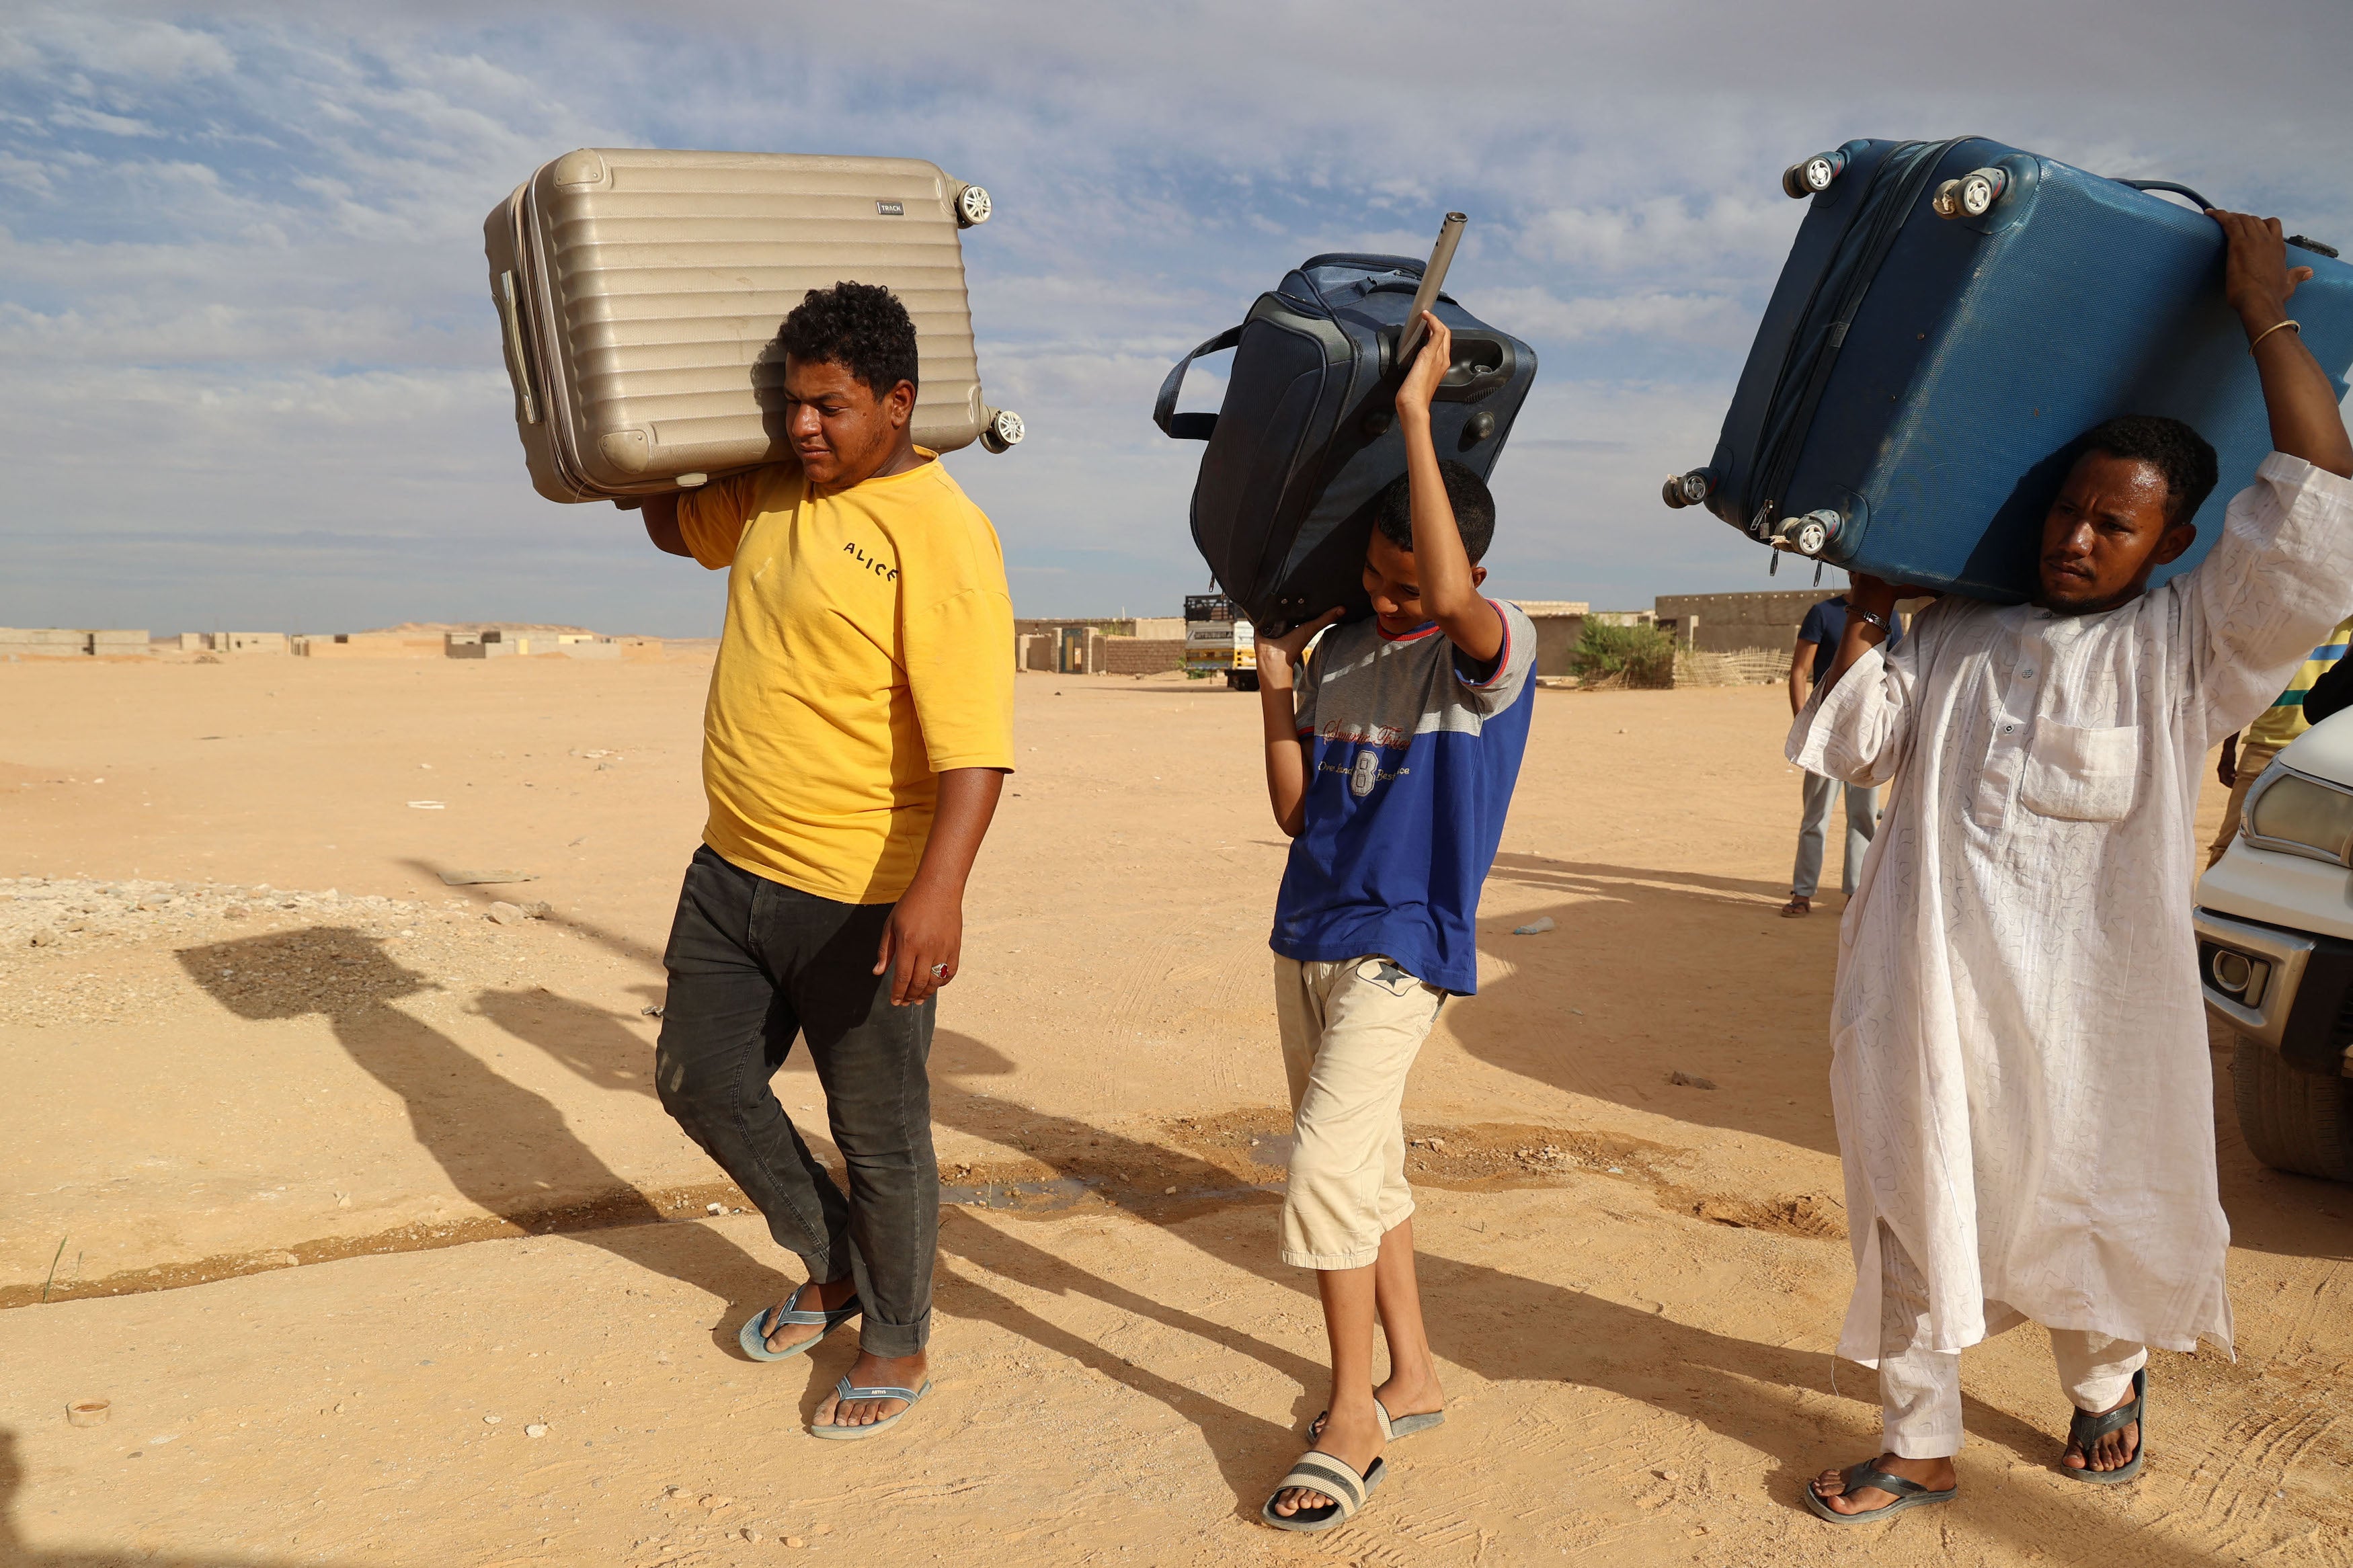 People carry suitcases in the Sudanese town of Wadi Halfa bordering Egypt.